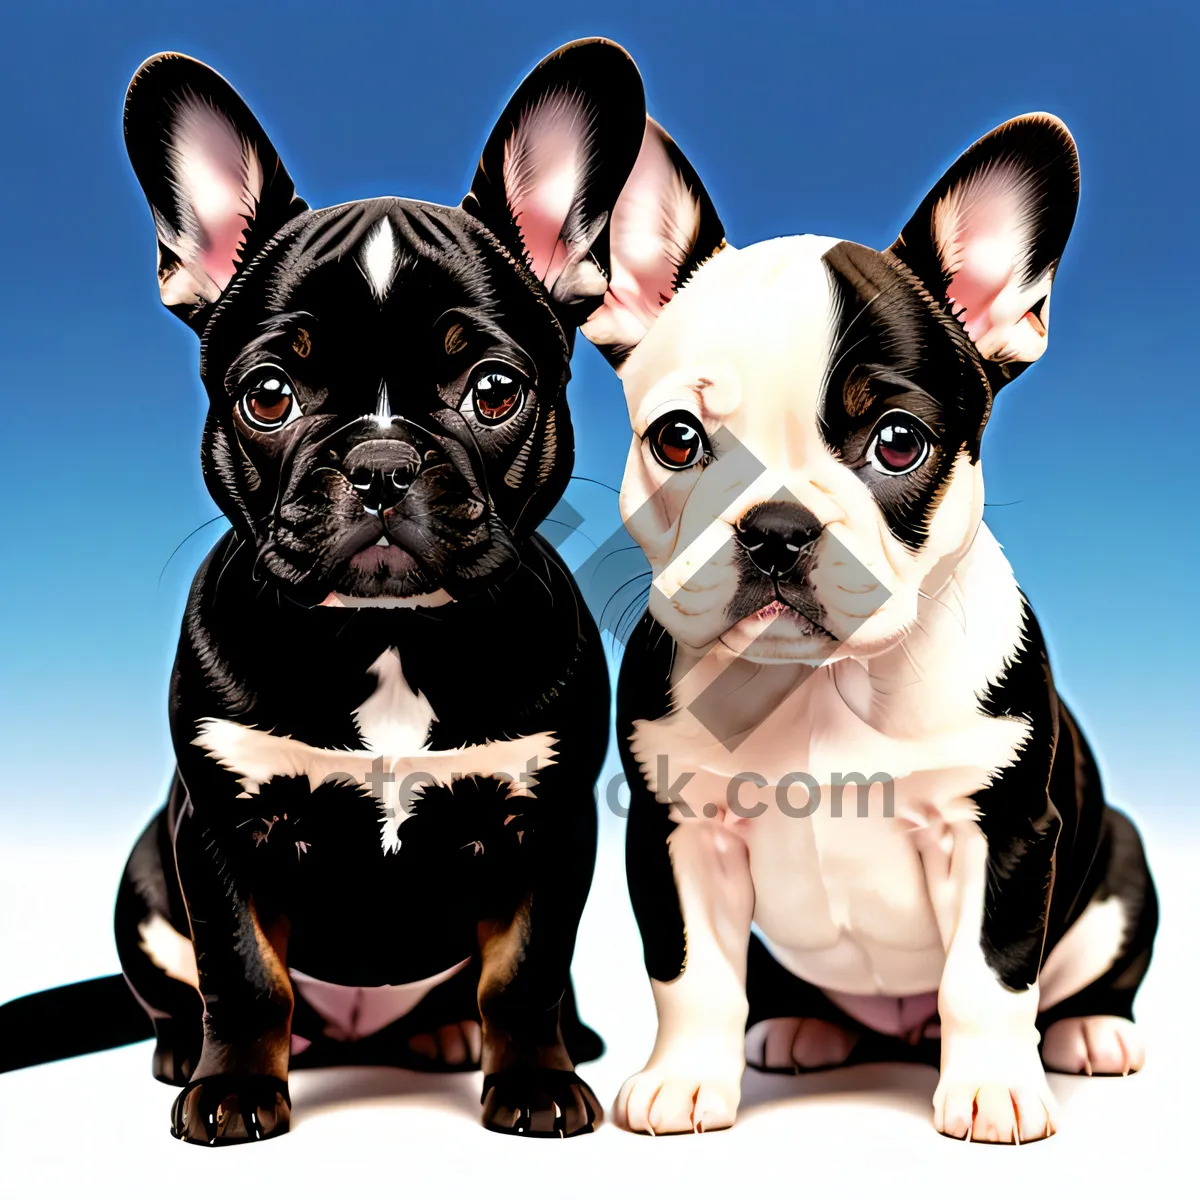 Picture of French bulldog puppies posing on a vibrant blue background